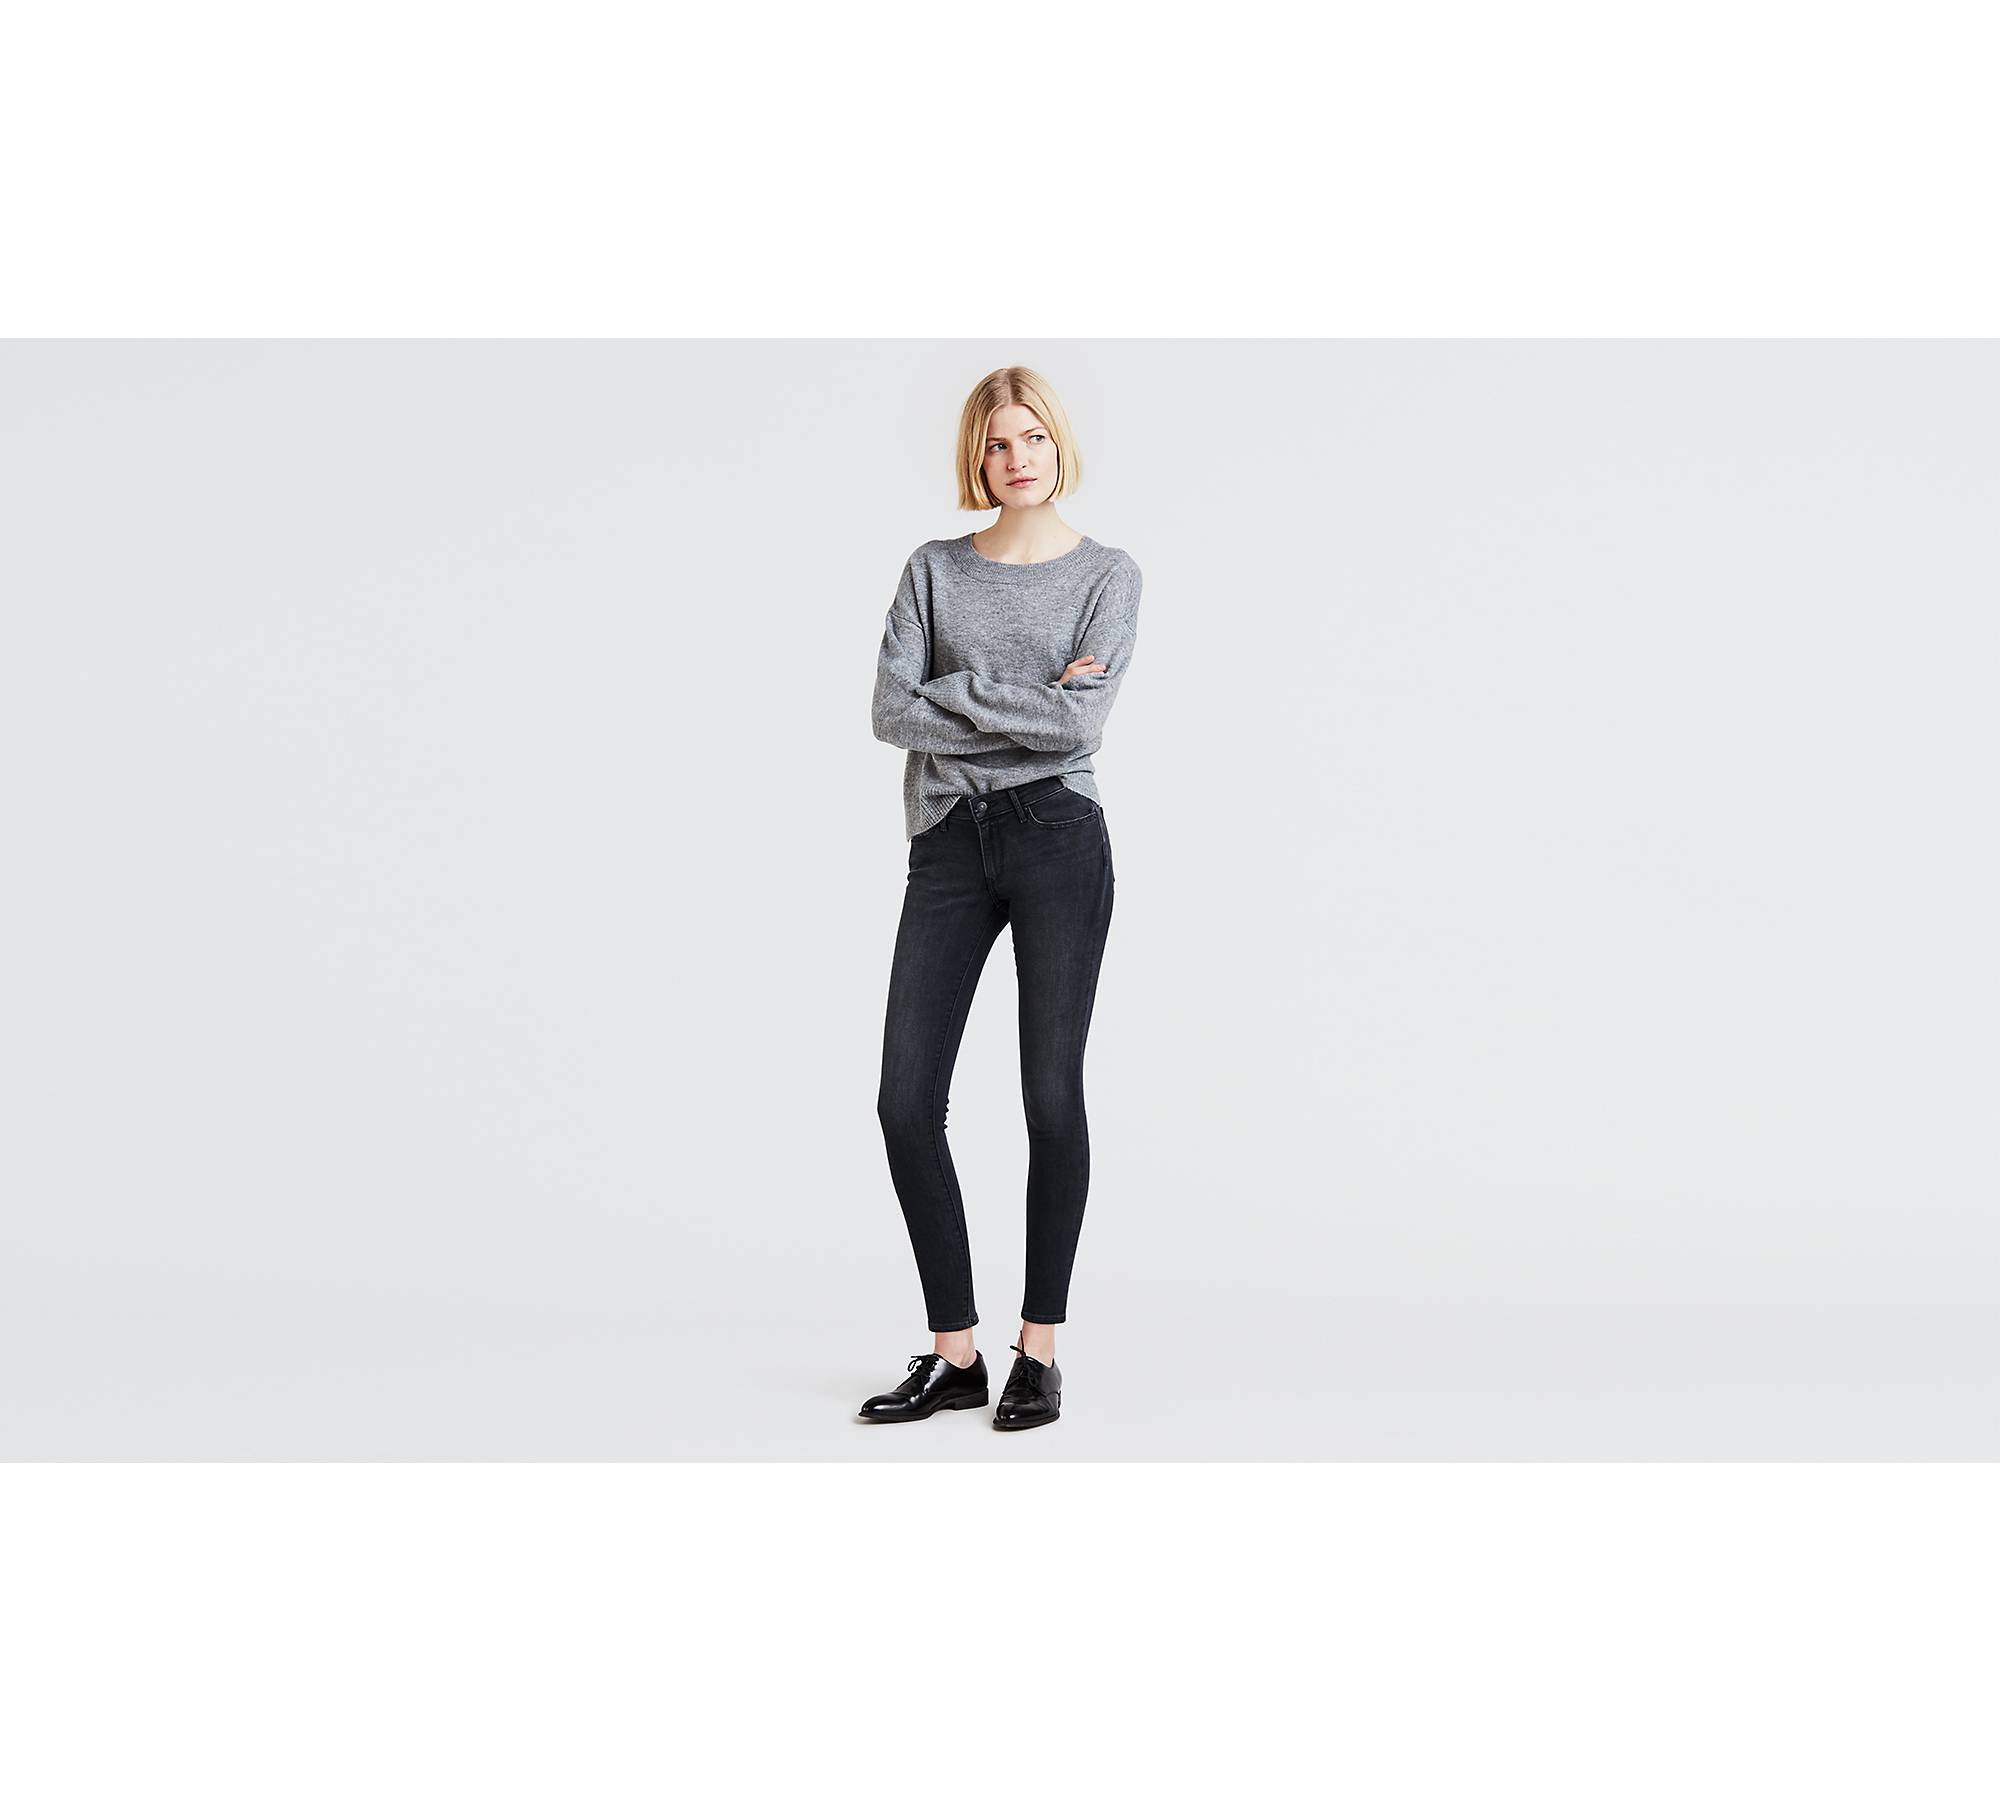 711 Skinny Women's Jeans With Back Zip - Black | Levi's® US